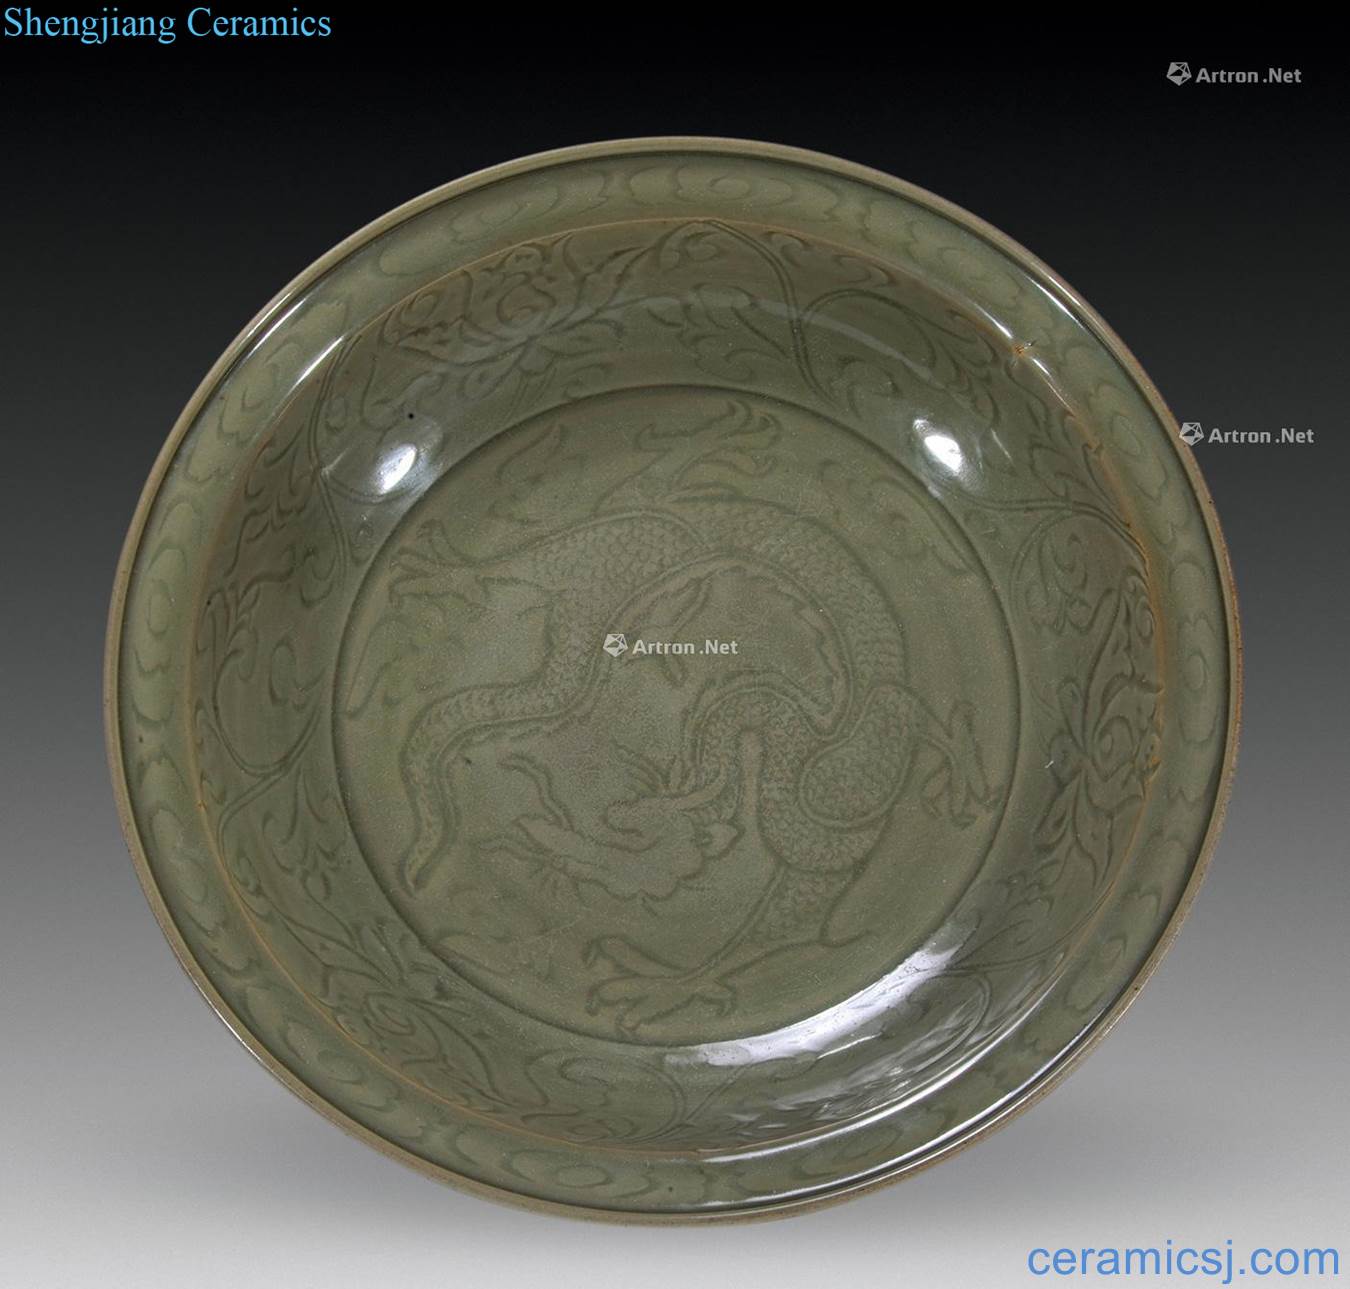 Ming Longquan passionflower dragon pattern plate